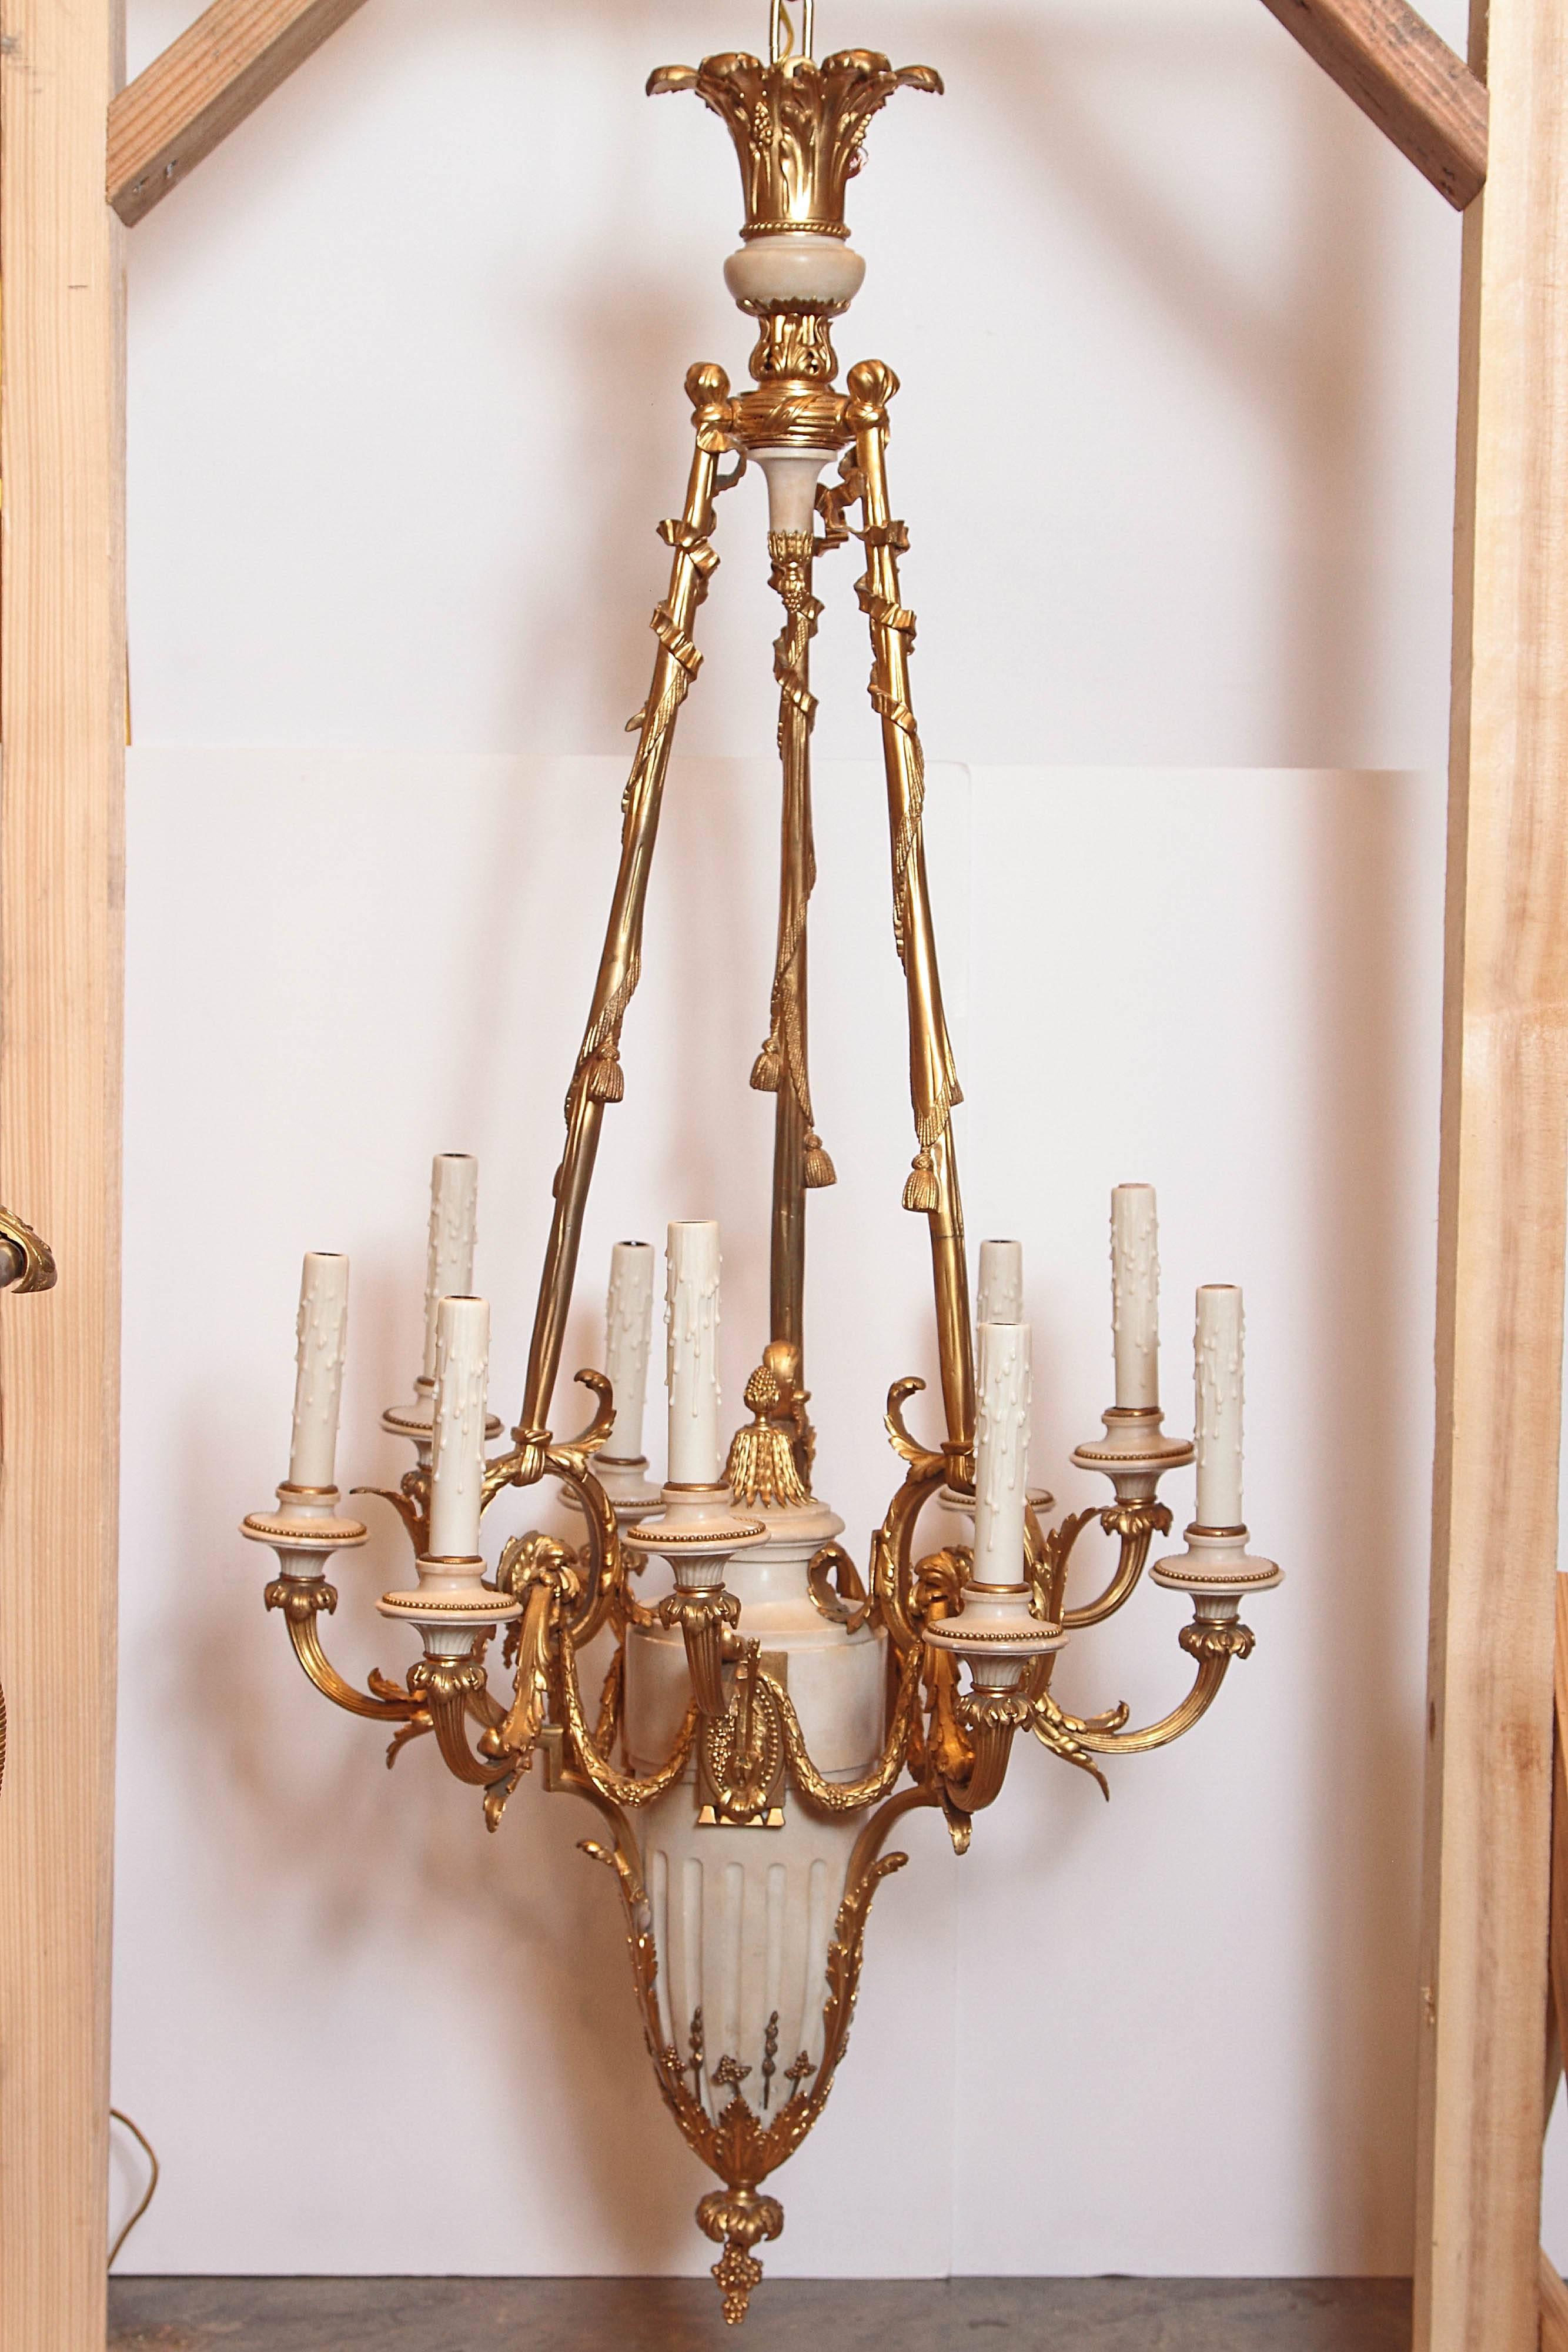 Very fine 19th century French Louis XVI gilt bronze and Cararra marble chandelier.